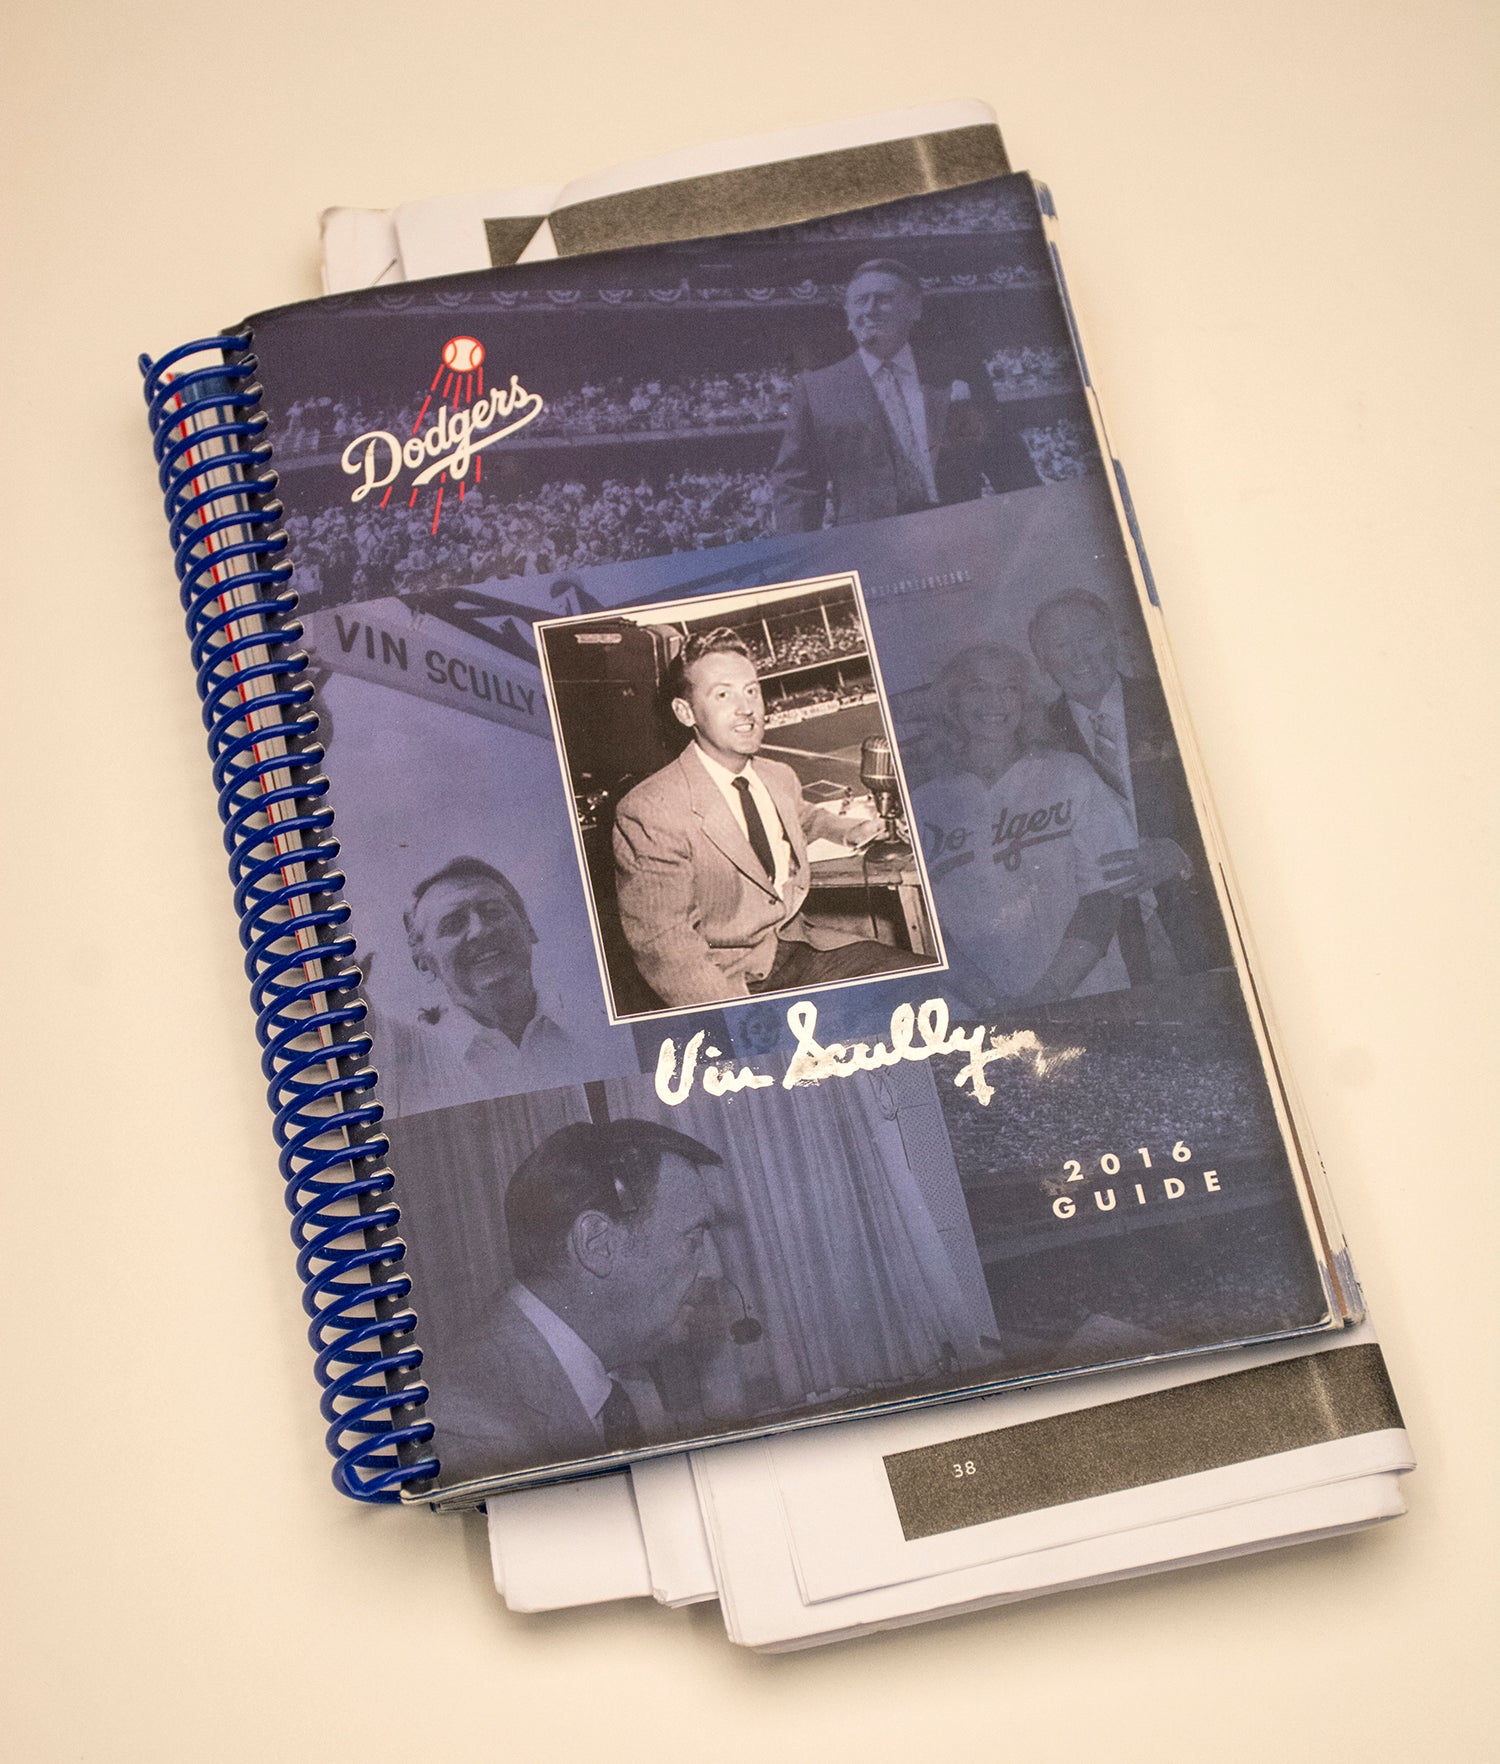 Vin Scully’s 2016 Dodgers Media Guide puts a 67-year long career into perspective 